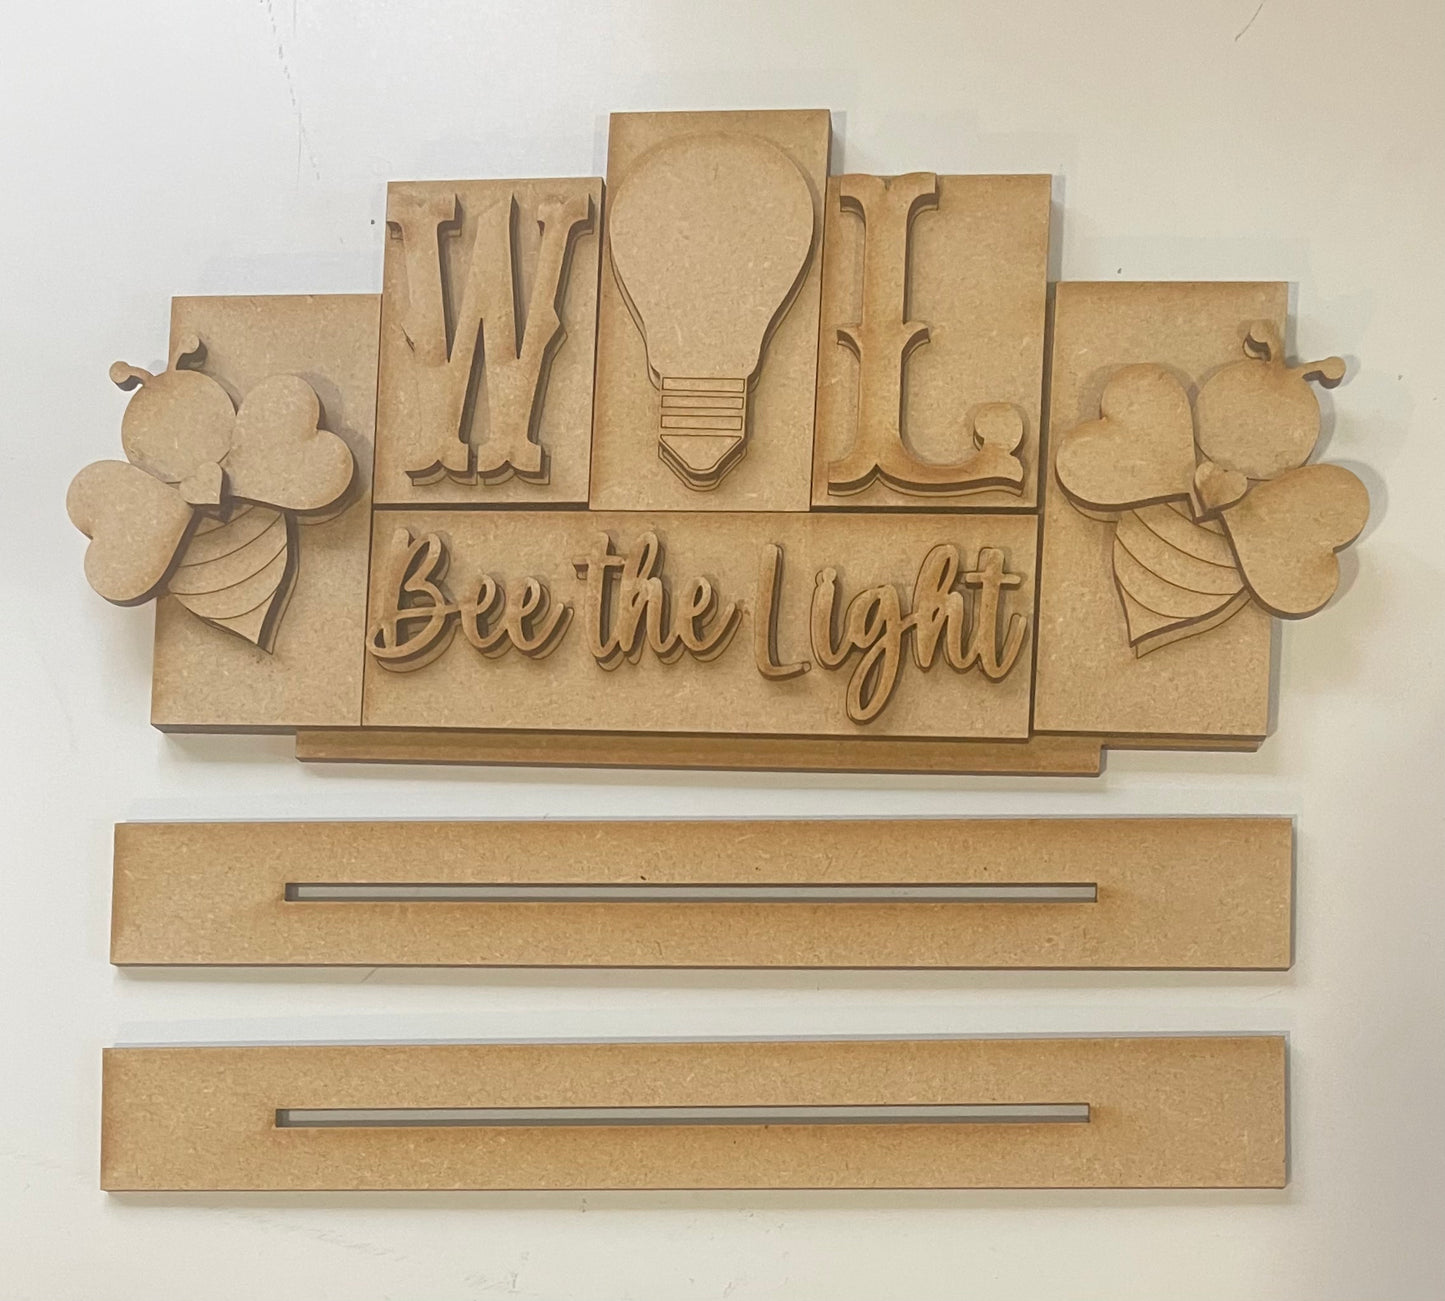 Watts of Love word kit - wood pieces, unpainted wood cutouts, ready for you to paint, scrapbook paper is not included